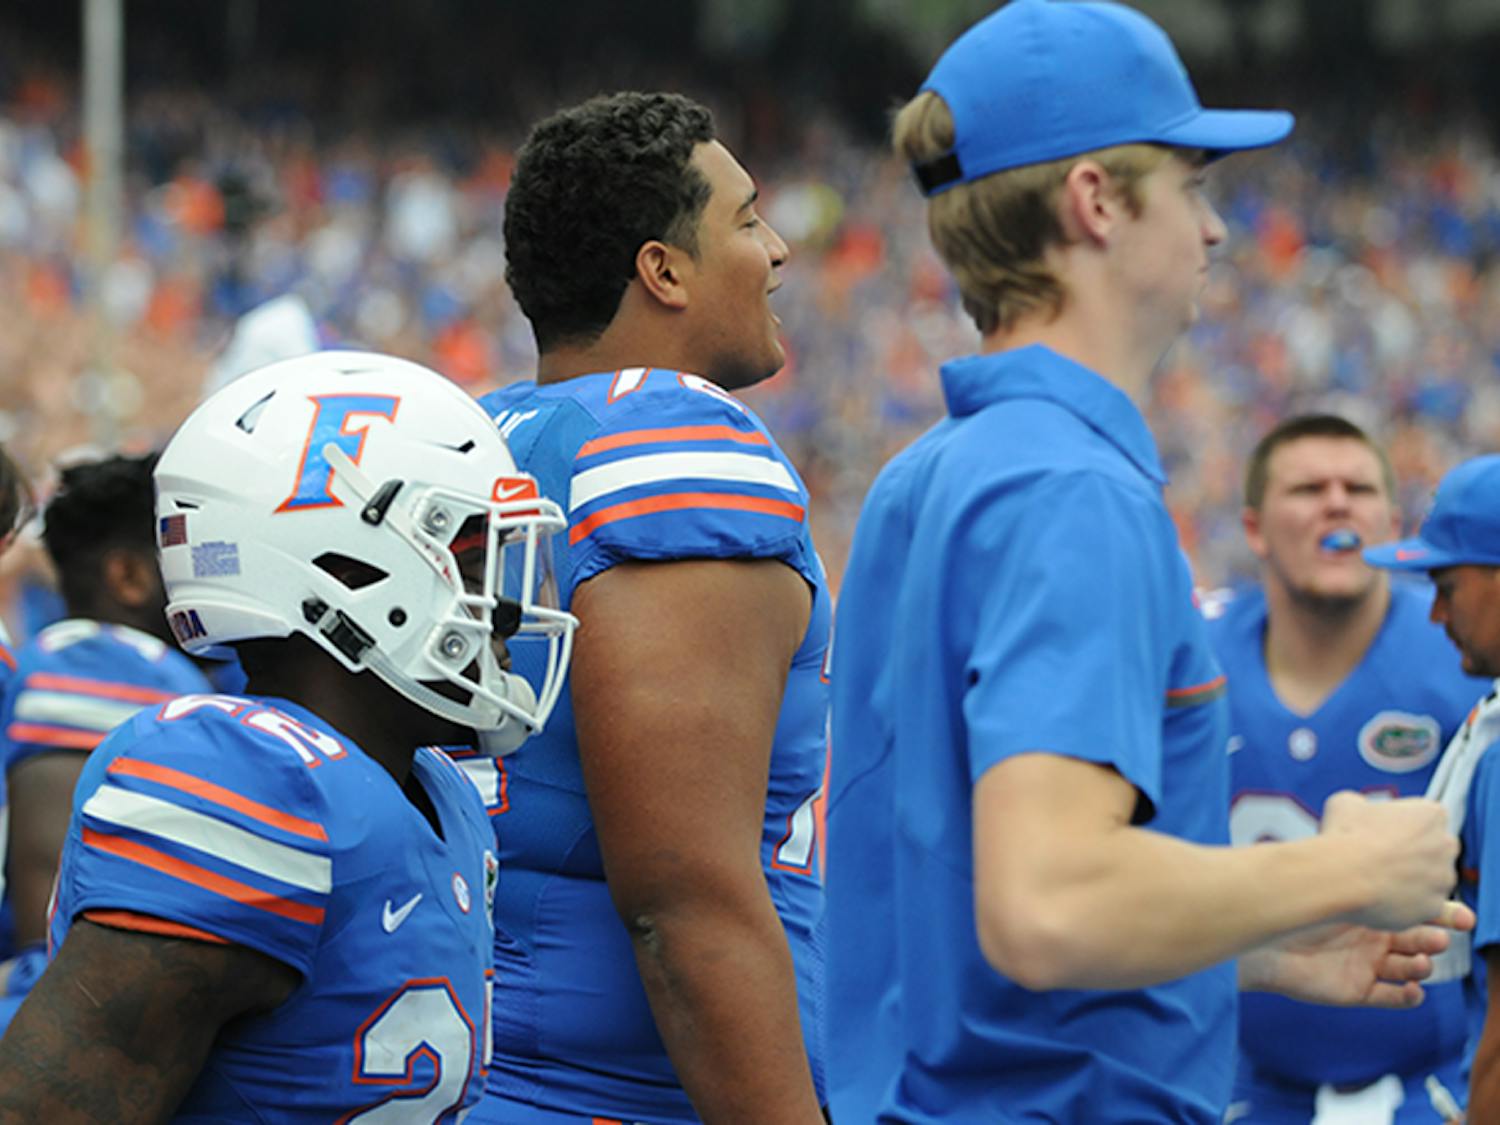 Stone Forsythe stands on the sideline during UF's win over South Carolina on Nov. 12, 2016. For height comparison, the player wearing the helmet is 5-foot-11.